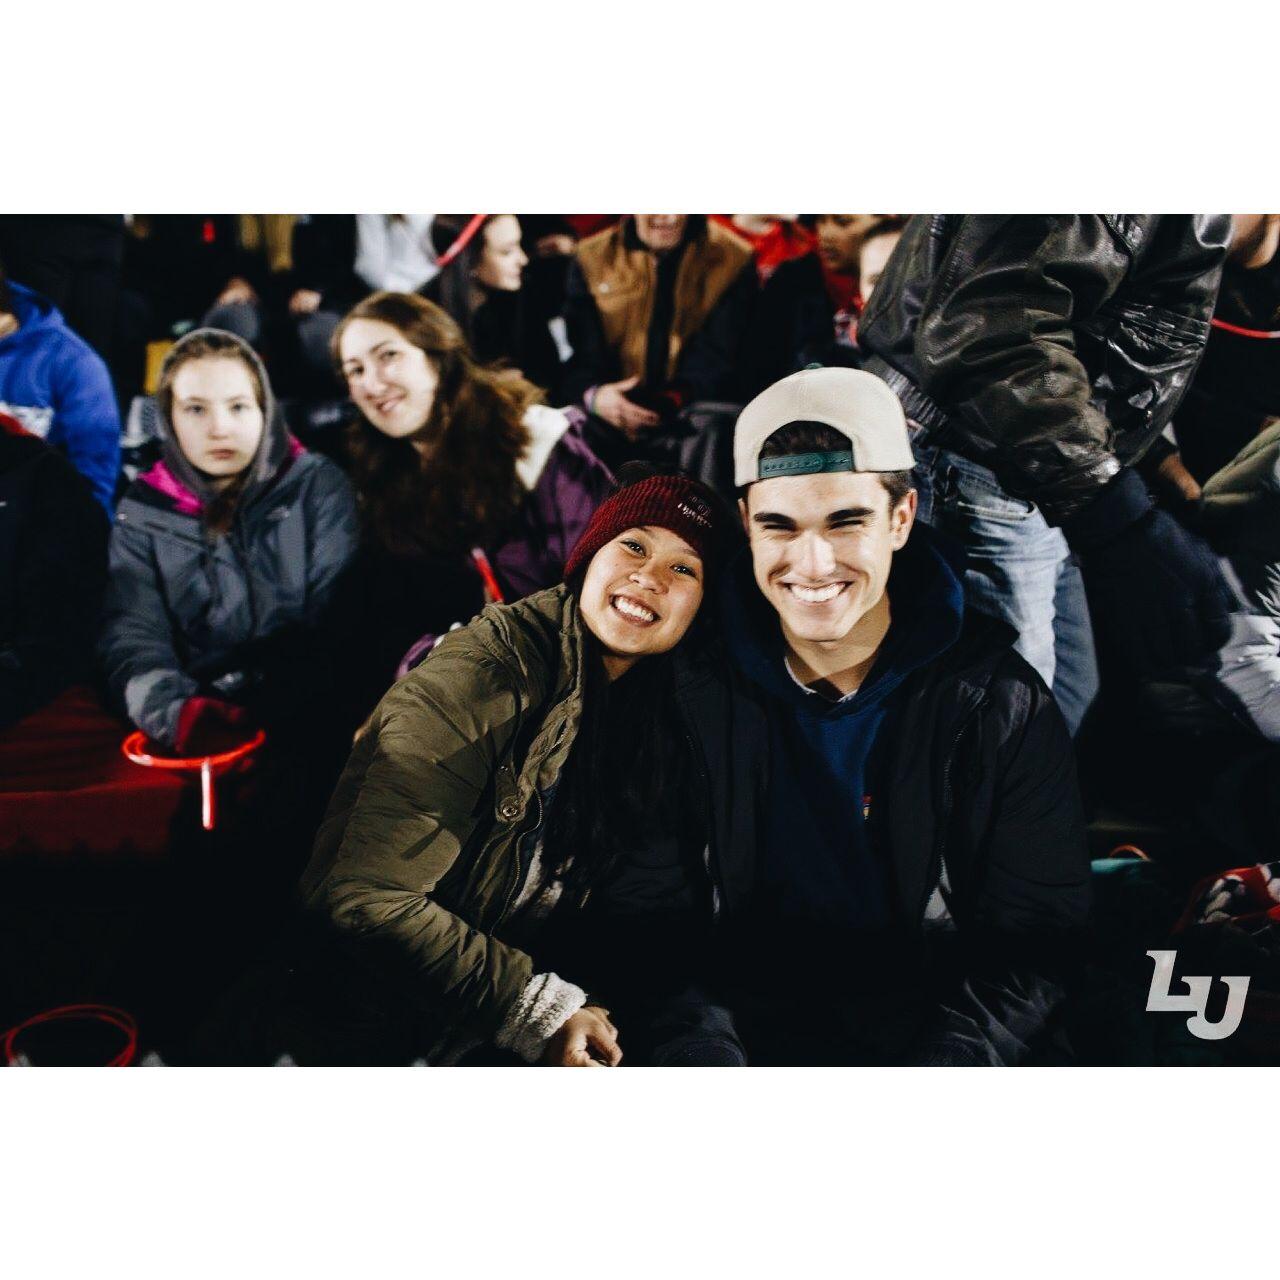 We were featured on Liberty University’s Facebook page at the Midnight Mayhem lacrosse game!